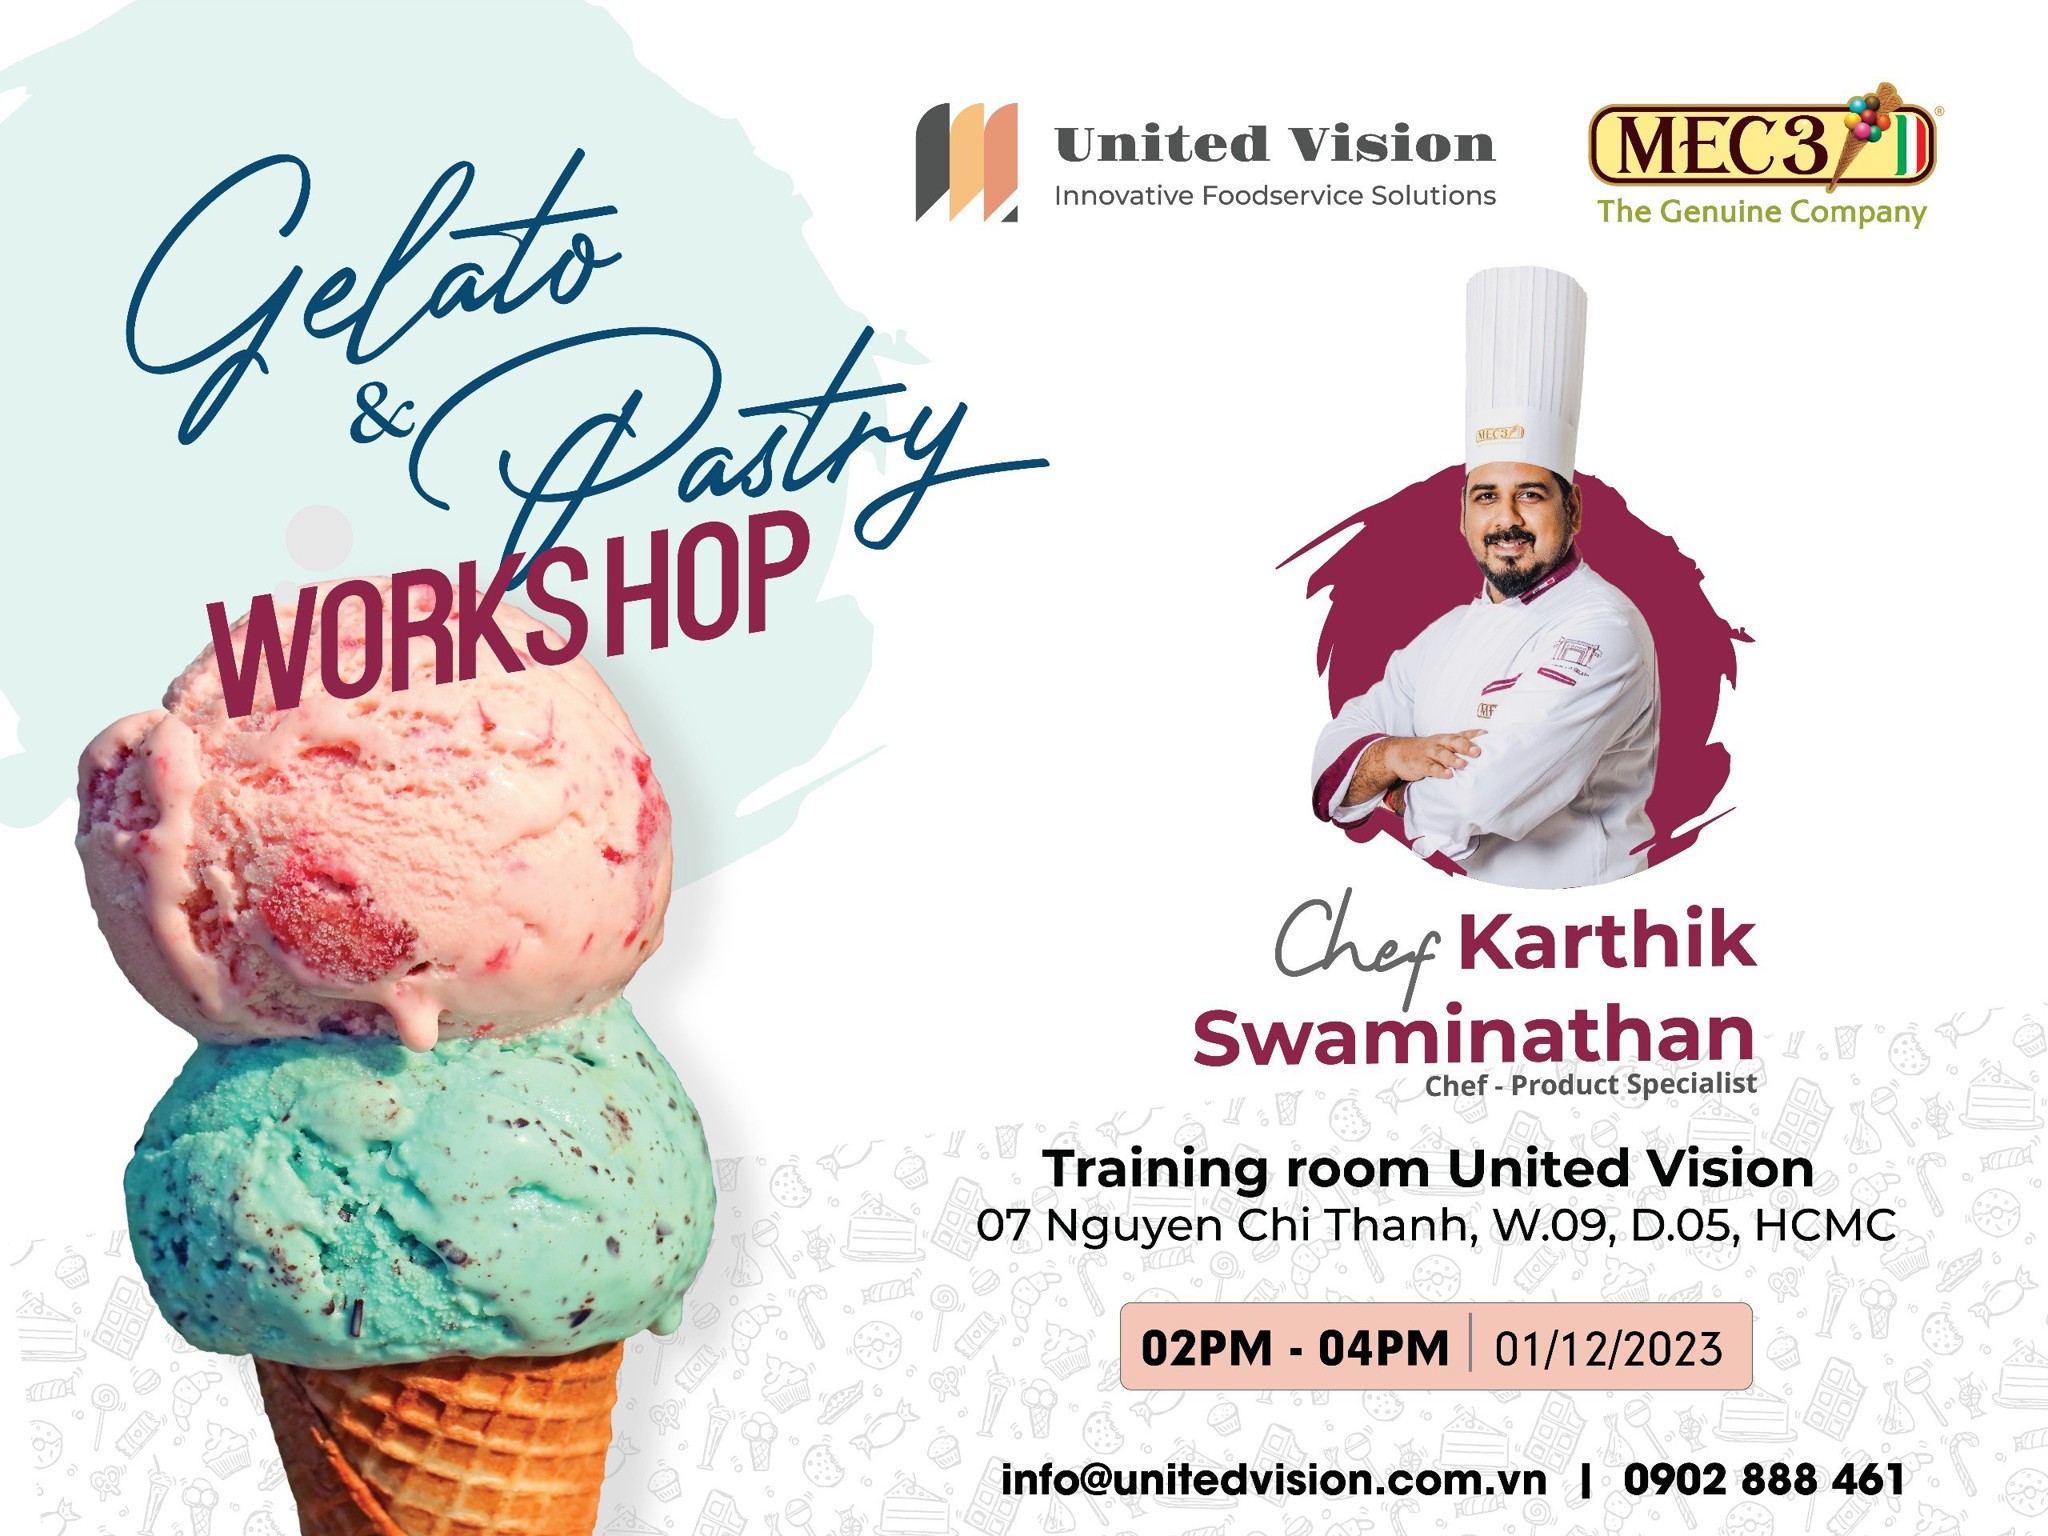 Gelato & Pastry Workshop | Learn About Ice Cream Ingredients From MEC3 And Their Applications